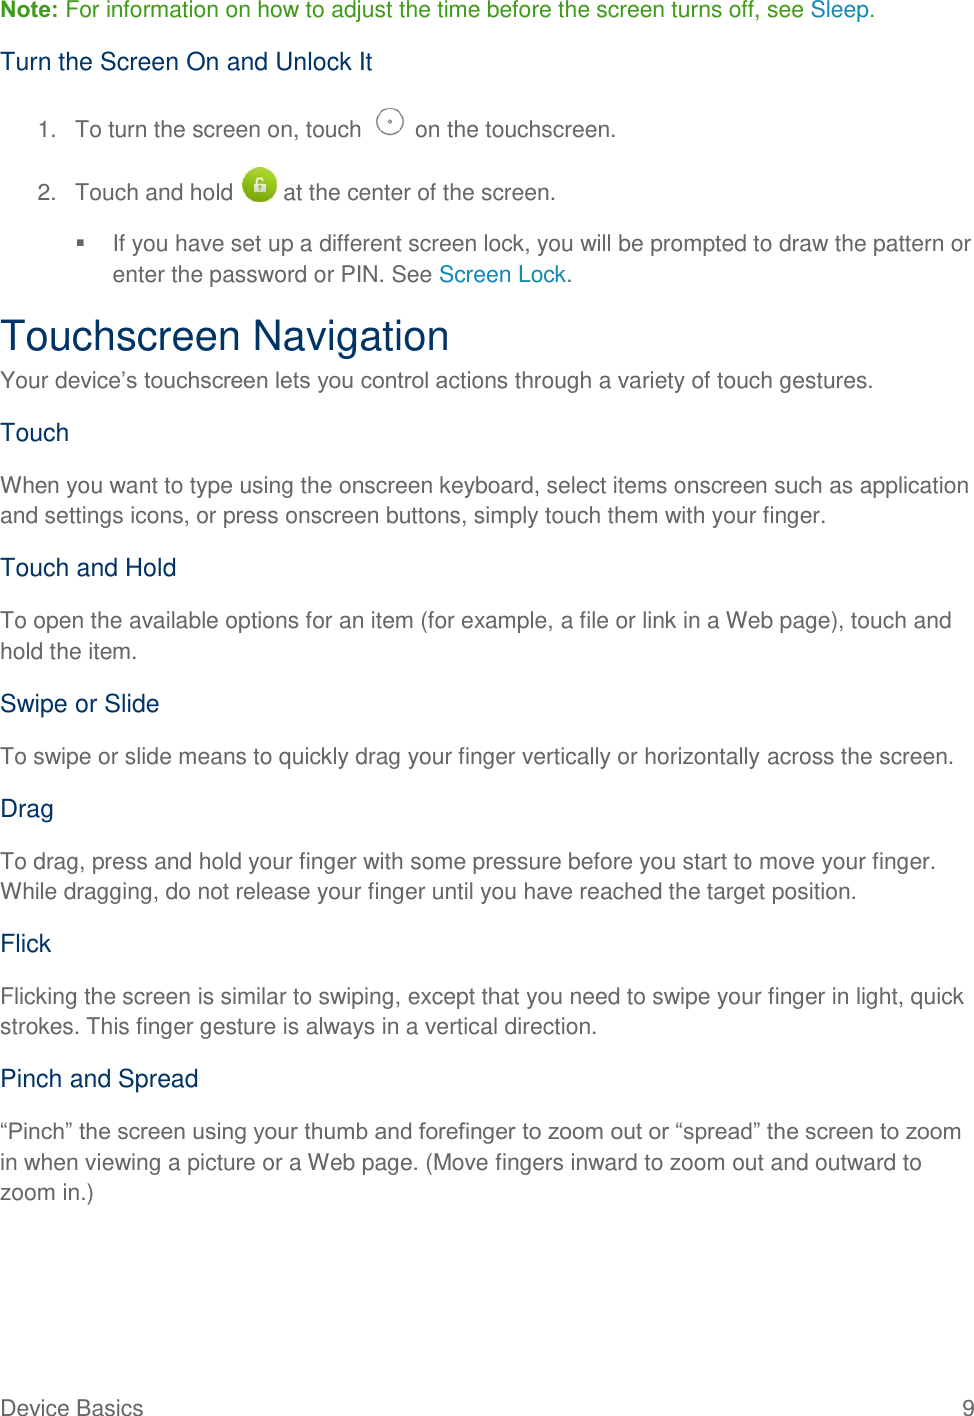  Device Basics  9 Note: For information on how to adjust the time before the screen turns off, see Sleep.  Turn the Screen On and Unlock It 1.  To turn the screen on, touch   on the touchscreen.  2.  Touch and hold   at the center of the screen.   If you have set up a different screen lock, you will be prompted to draw the pattern or enter the password or PIN. See Screen Lock. Touchscreen Navigation Your device’s touchscreen lets you control actions through a variety of touch gestures. Touch When you want to type using the onscreen keyboard, select items onscreen such as application and settings icons, or press onscreen buttons, simply touch them with your finger. Touch and Hold To open the available options for an item (for example, a file or link in a Web page), touch and hold the item. Swipe or Slide To swipe or slide means to quickly drag your finger vertically or horizontally across the screen. Drag To drag, press and hold your finger with some pressure before you start to move your finger. While dragging, do not release your finger until you have reached the target position. Flick Flicking the screen is similar to swiping, except that you need to swipe your finger in light, quick strokes. This finger gesture is always in a vertical direction. Pinch and Spread “Pinch” the screen using your thumb and forefinger to zoom out or “spread” the screen to zoom in when viewing a picture or a Web page. (Move fingers inward to zoom out and outward to zoom in.) 